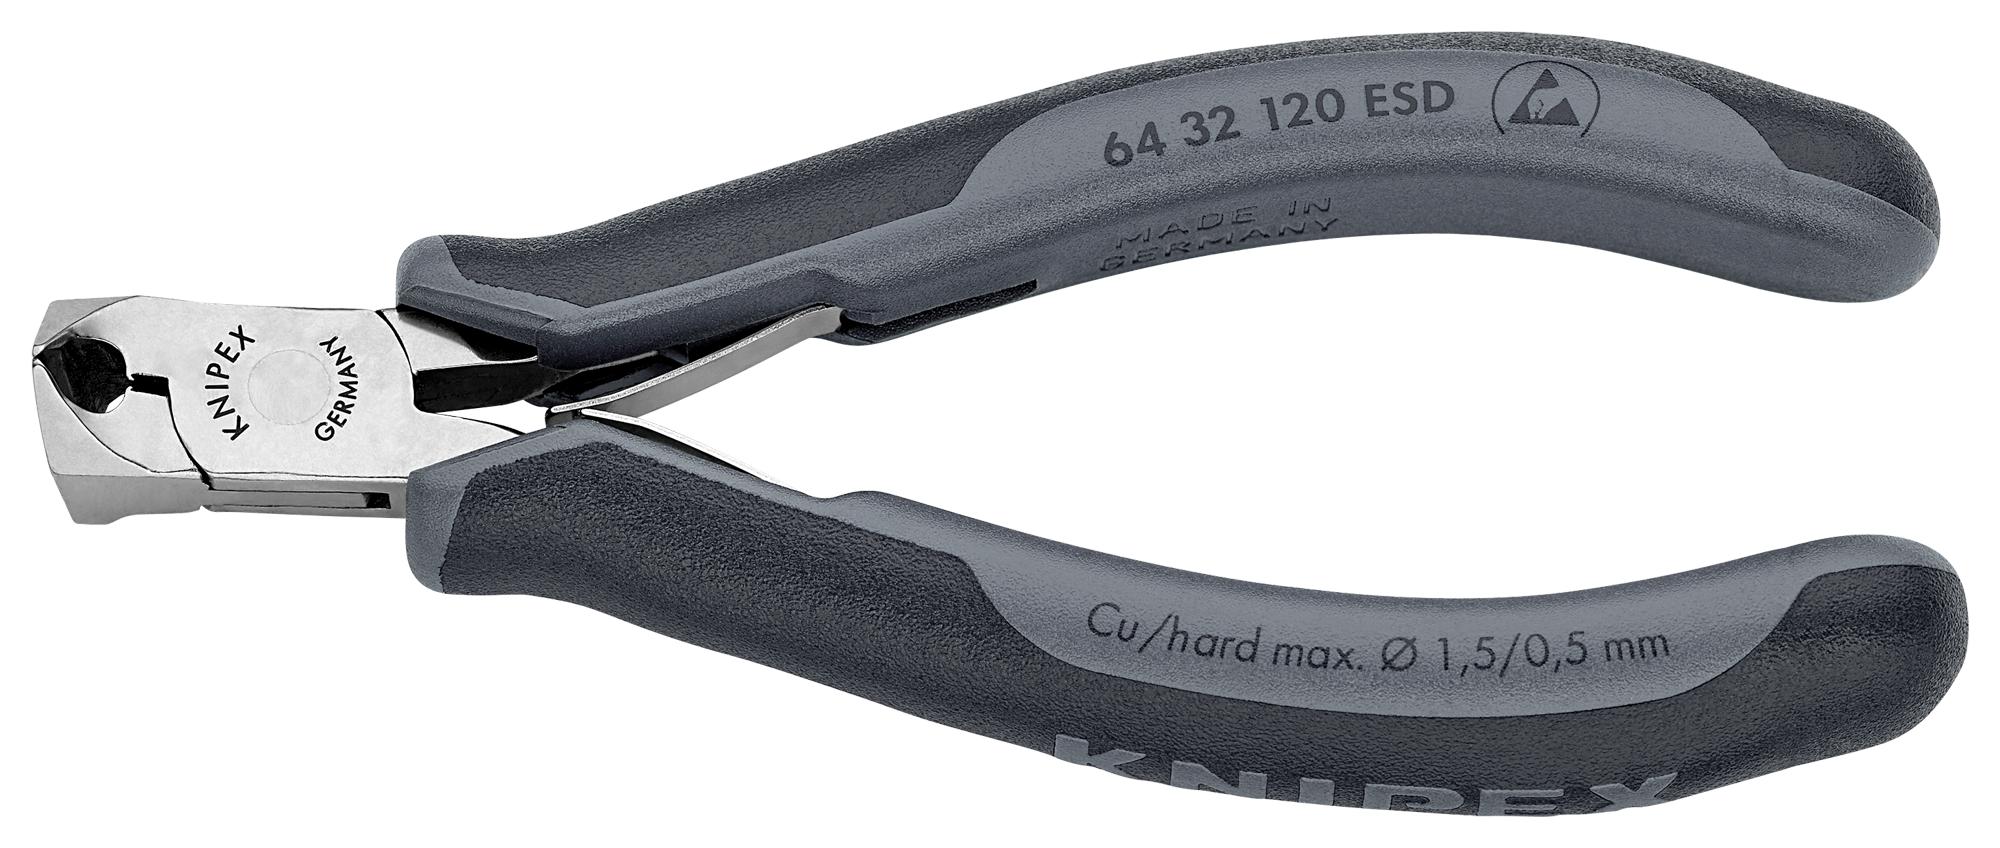 64 32 120 ESD OBLIQUE CUTTING NIPPERS KNIPEX